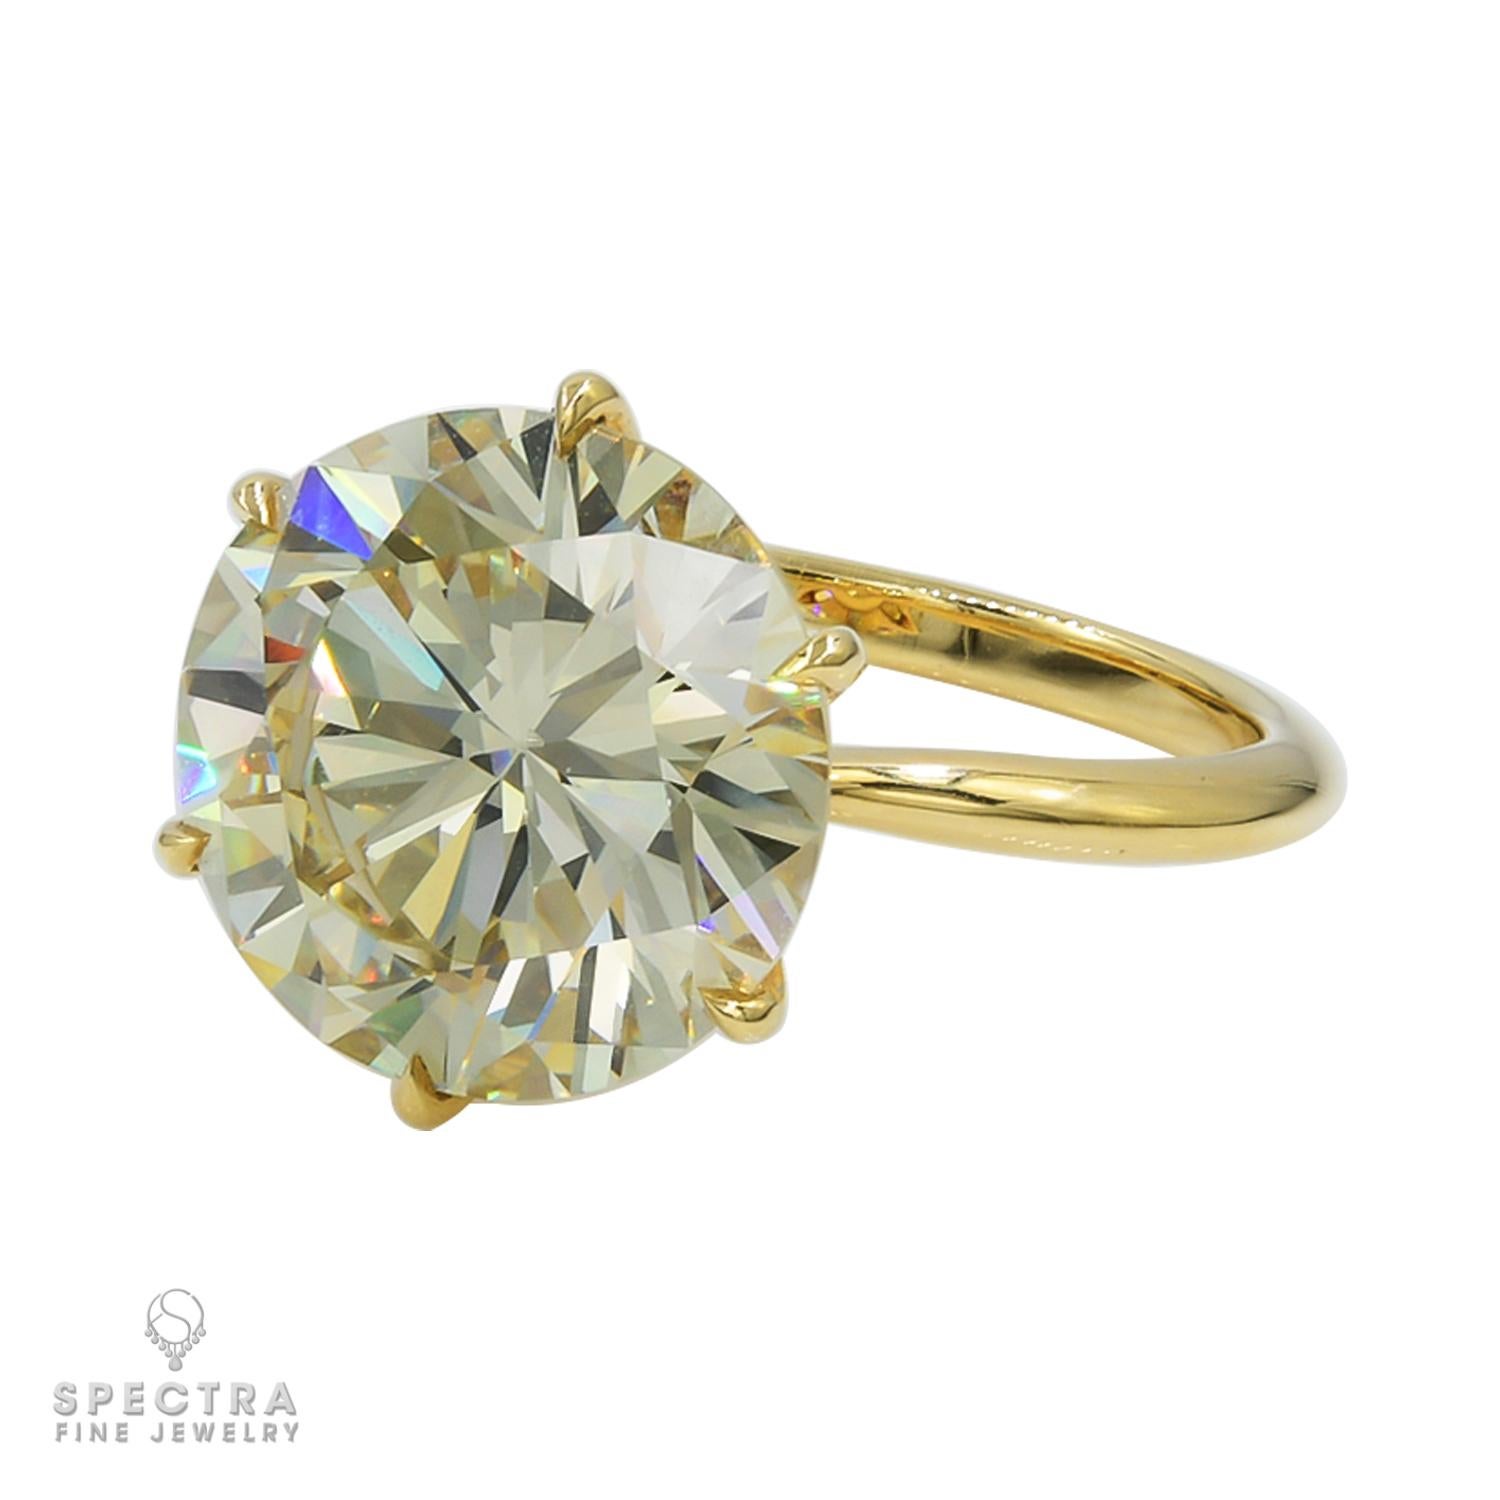 A stunning engagement ring featuring a 5.55 carat round diamond mounted in 18k yellow gold. 
The color of the diamond is Y-Z, it is not certified.
Weight of the ring is 3.91 grams.
Size 6. Resizing available.